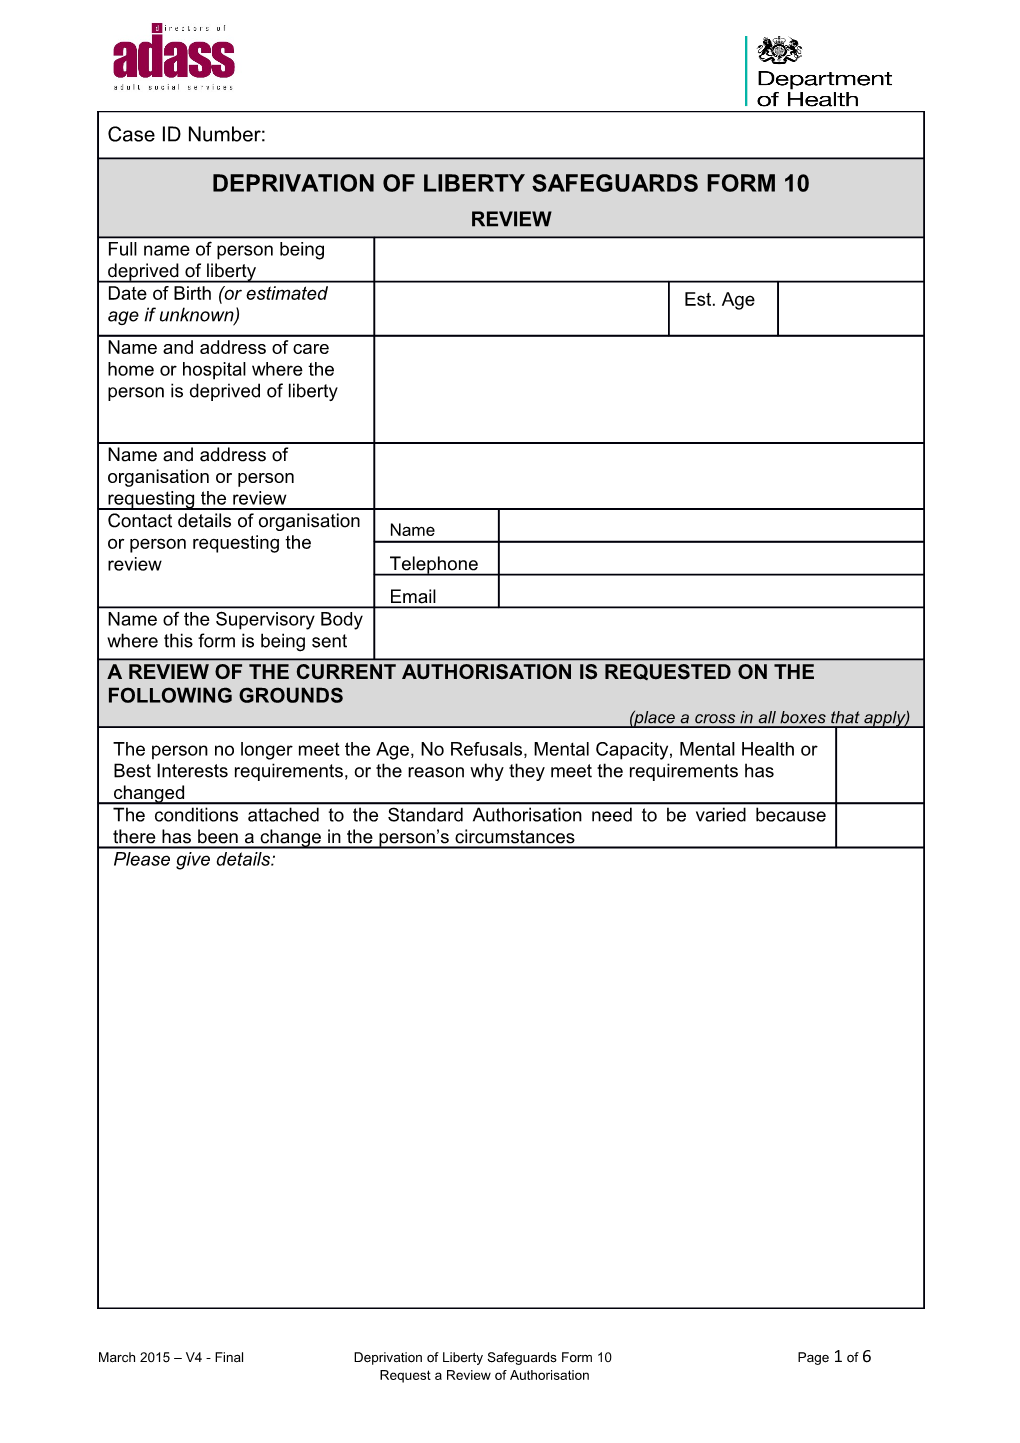 The Remainder of This Form Will Be Completed by the Supervisory Body